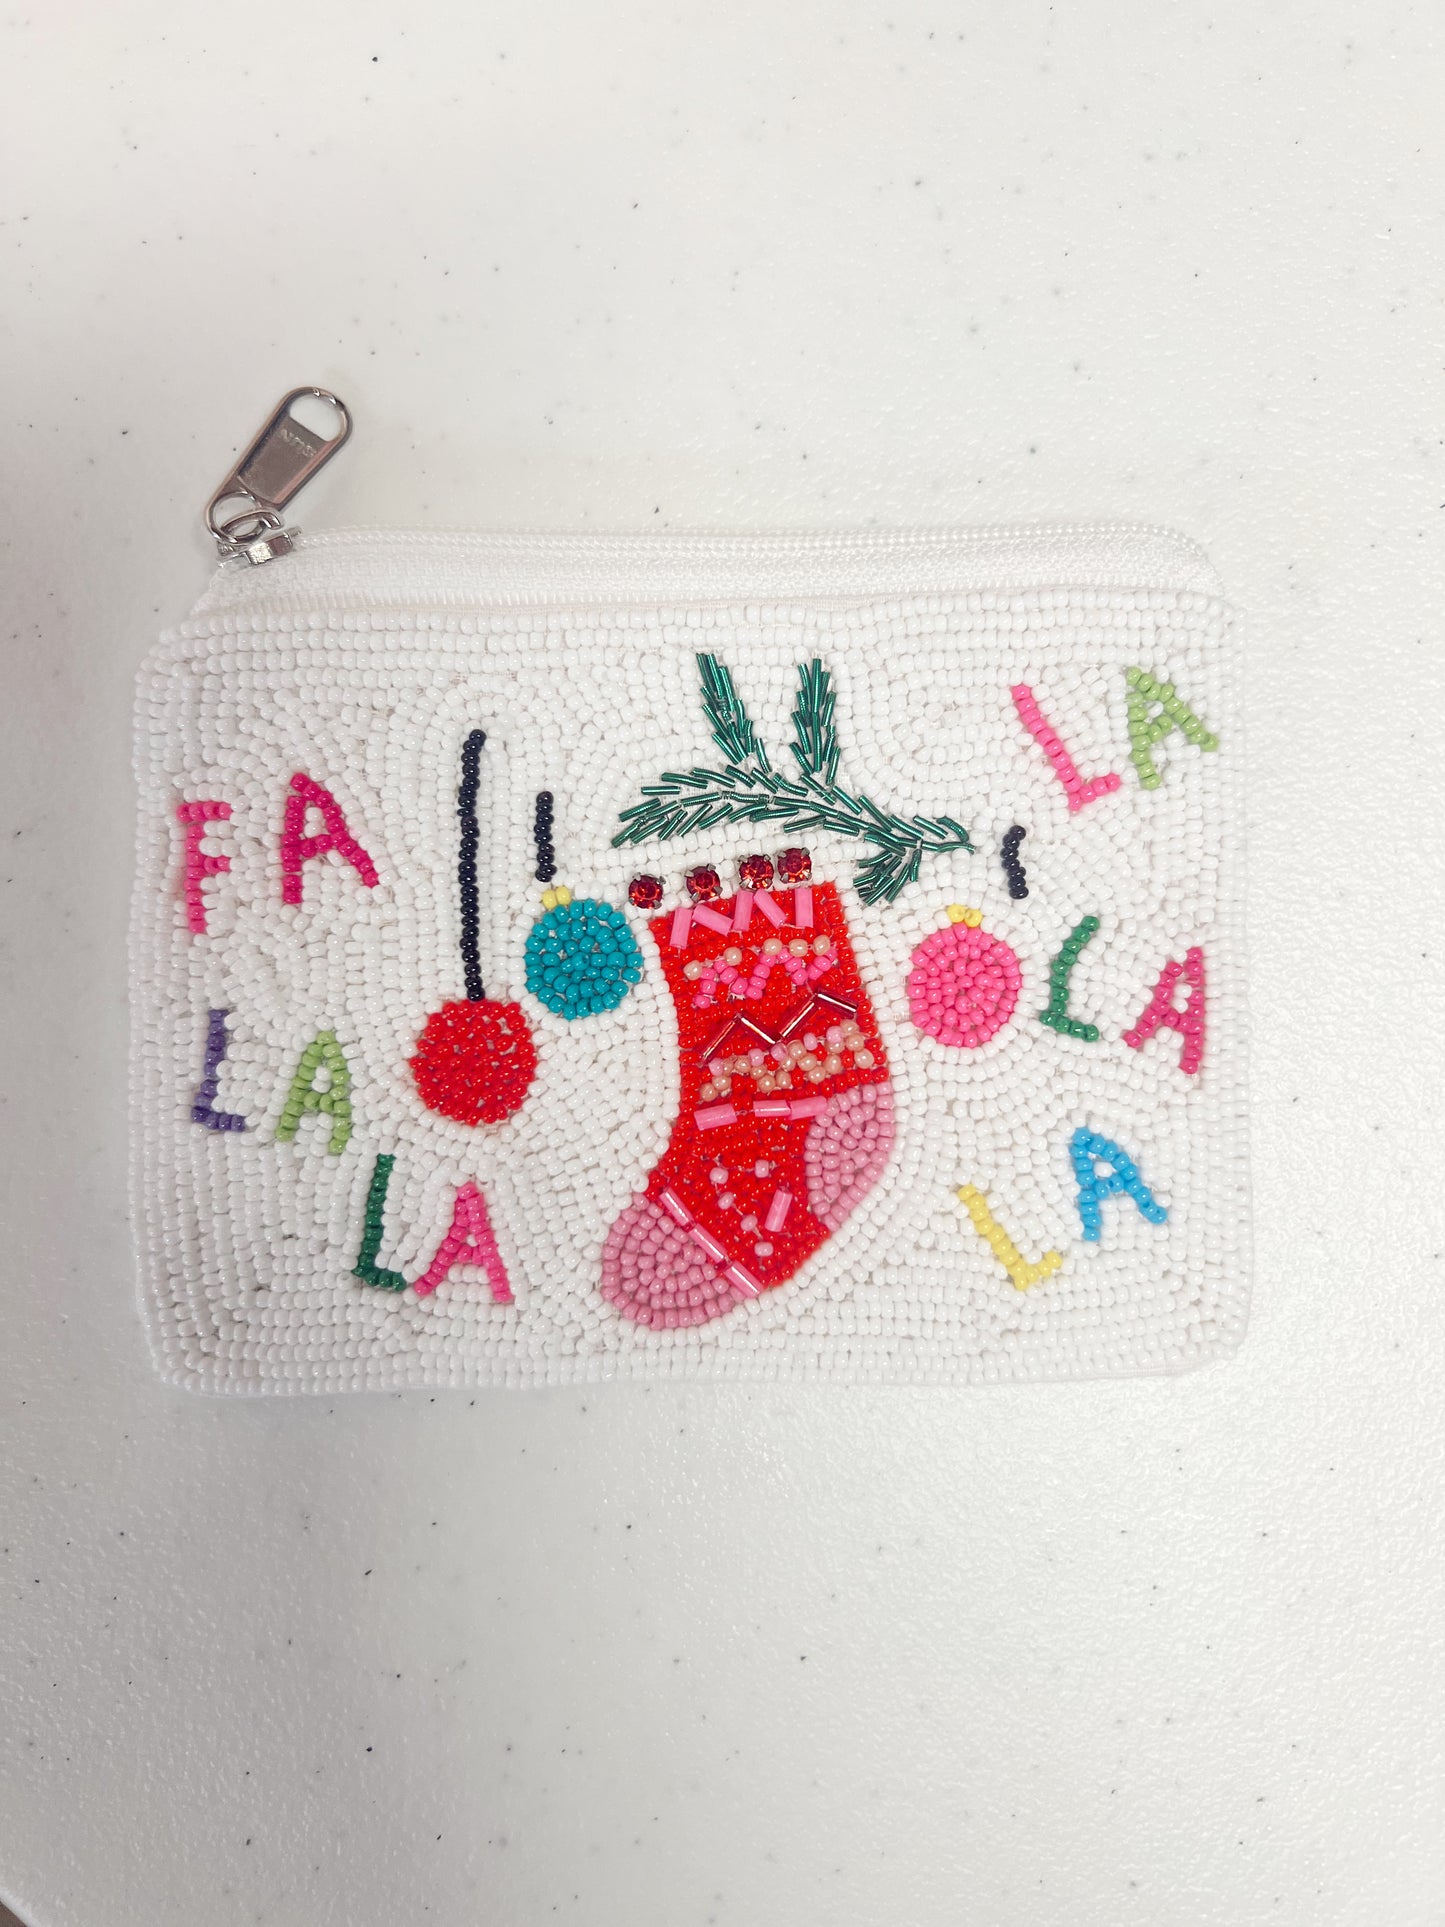 Mini Seed Bead Pouch